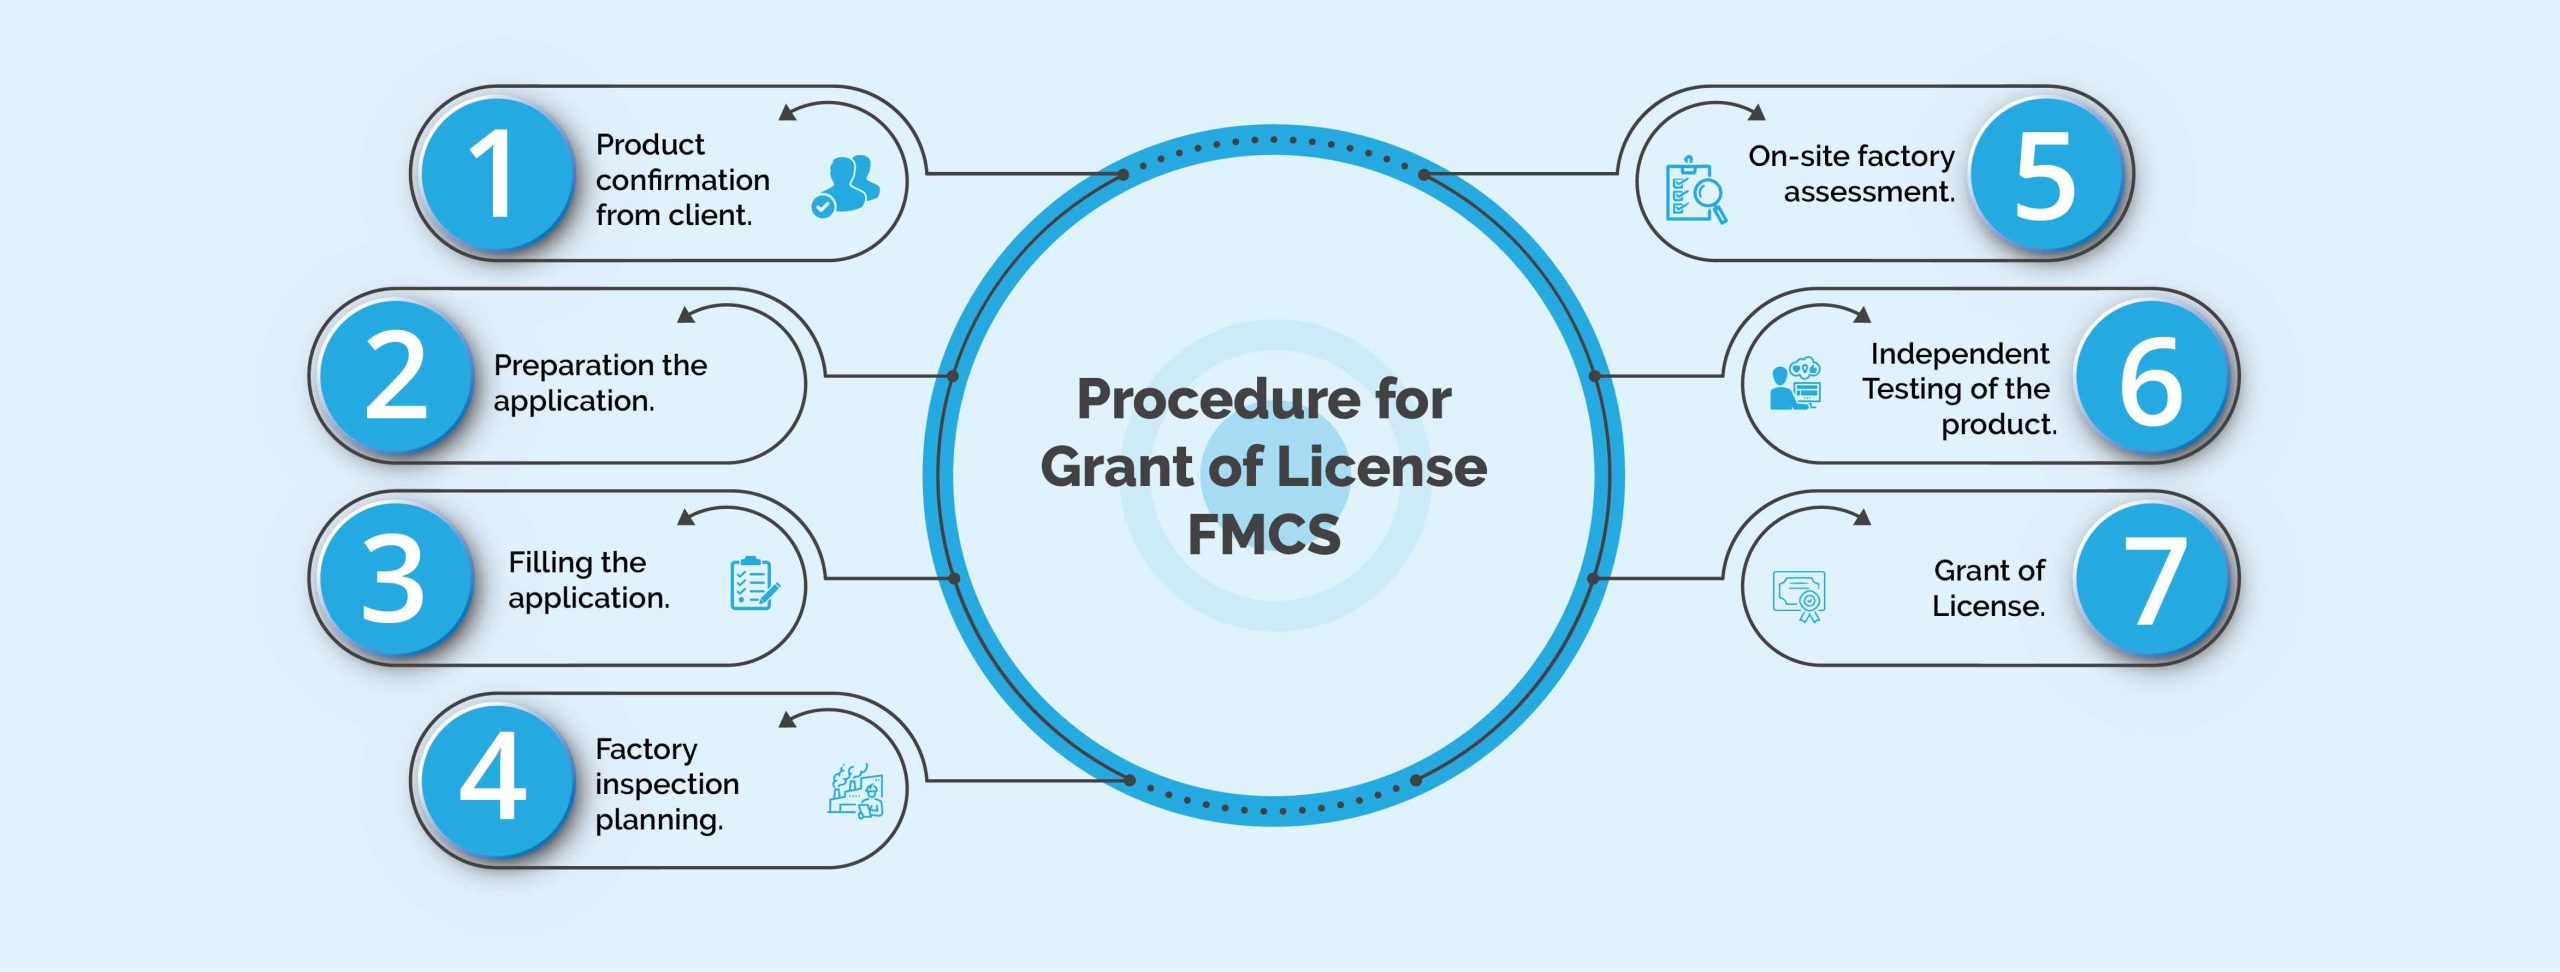 PROCEDURE FOR GRANT OF LICENSE FMCS